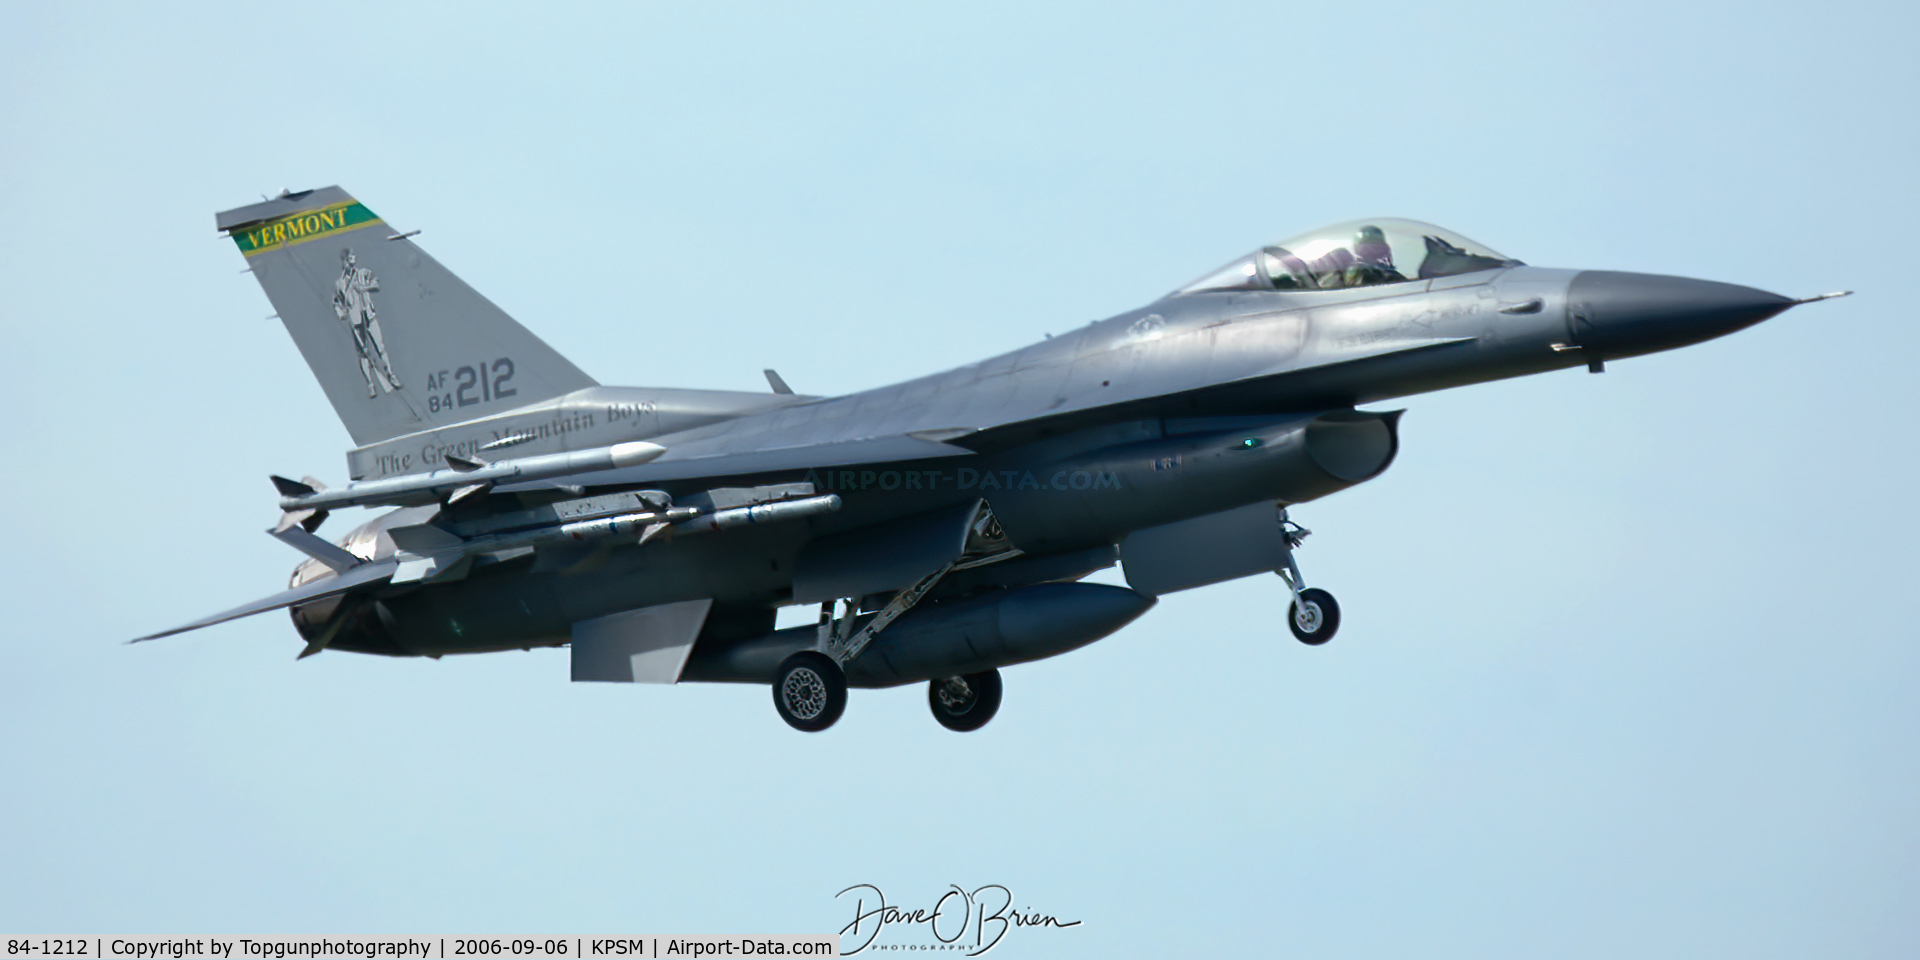 84-1212, 1984 General Dynamics F-16C Fighting Falcon C/N 5C-49, MAPLE11 inbound to Pease